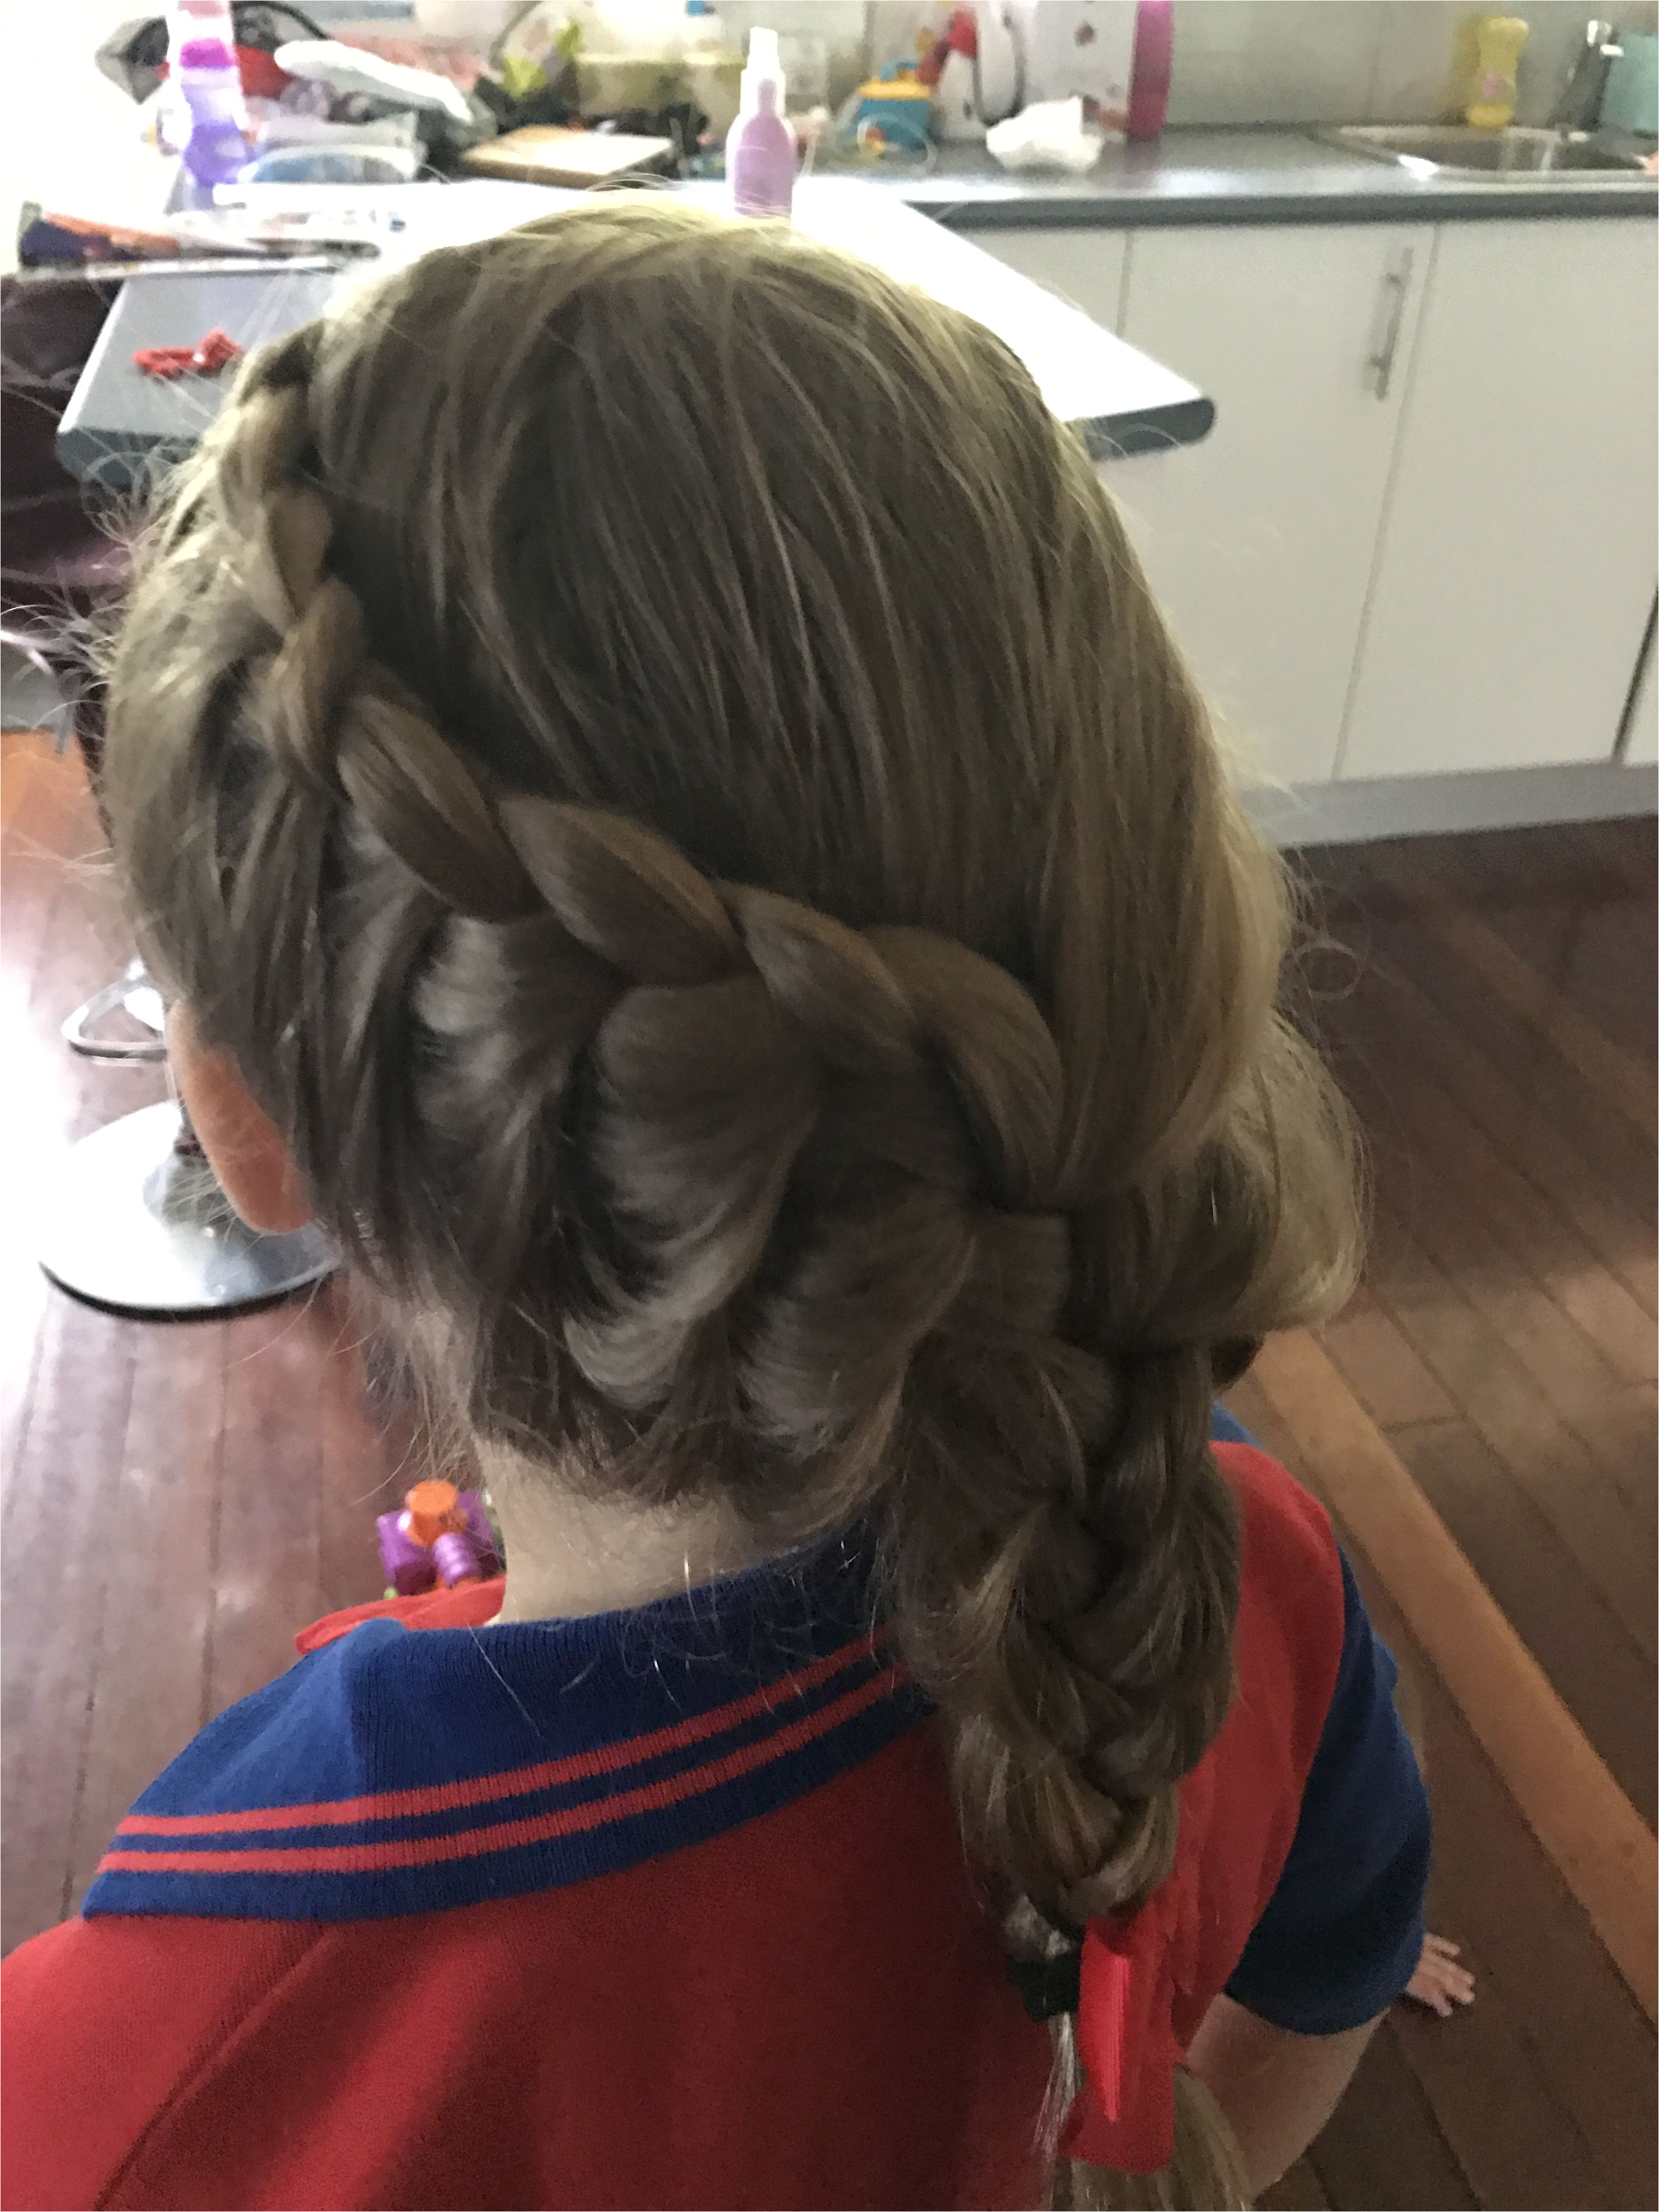 Pin by Snowpea on Easy hairstyles for school Pinterest